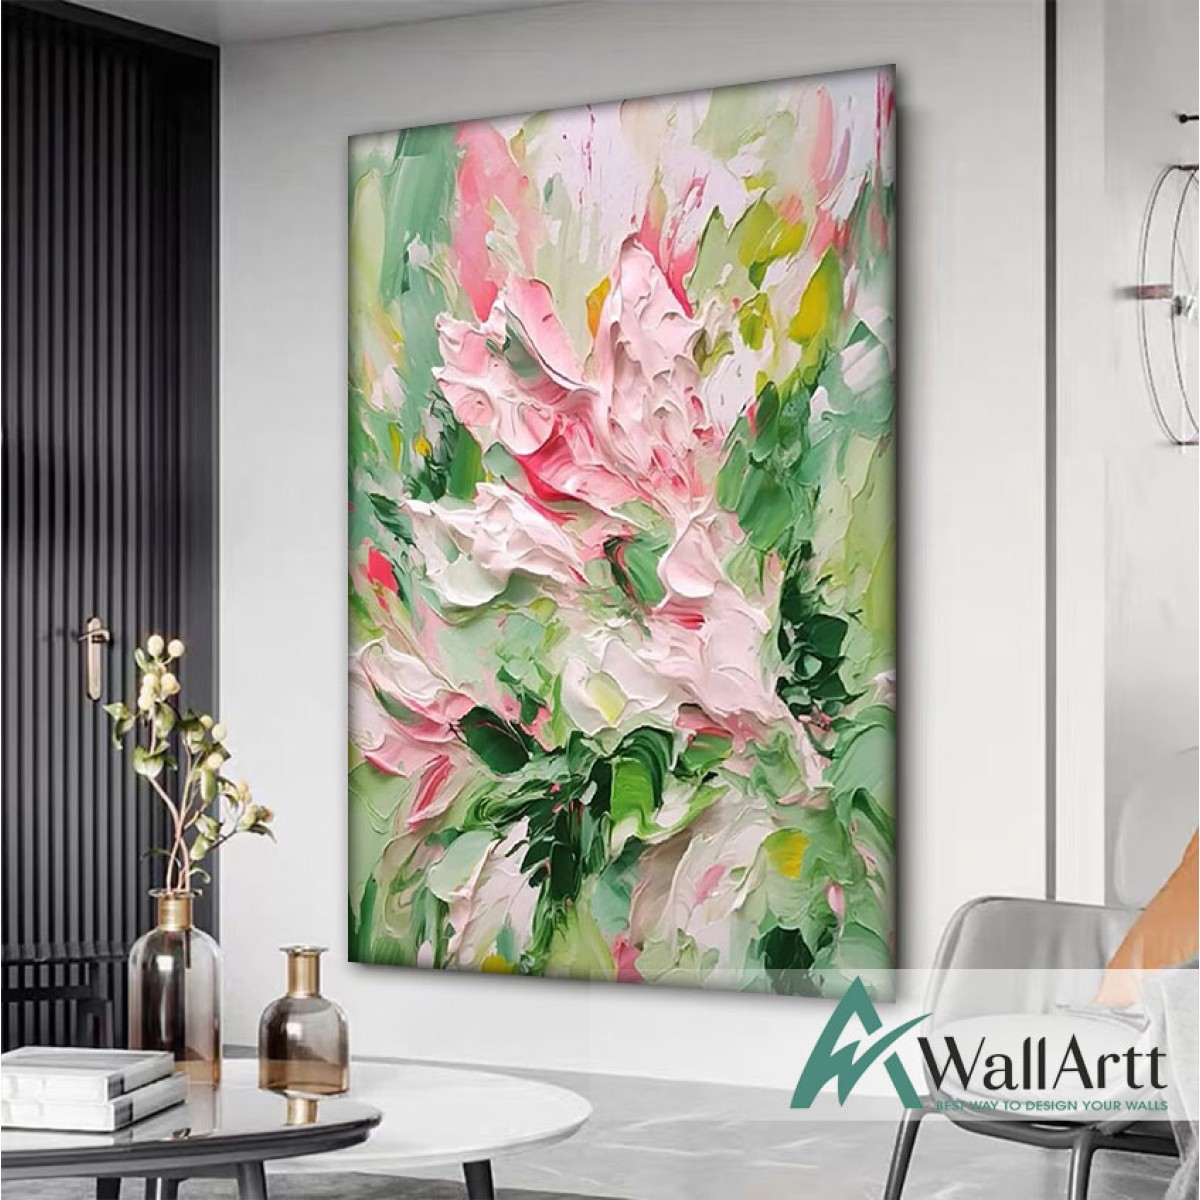 Cream White Flower with Gold 3d Heavy Textured Partial Oil Painting